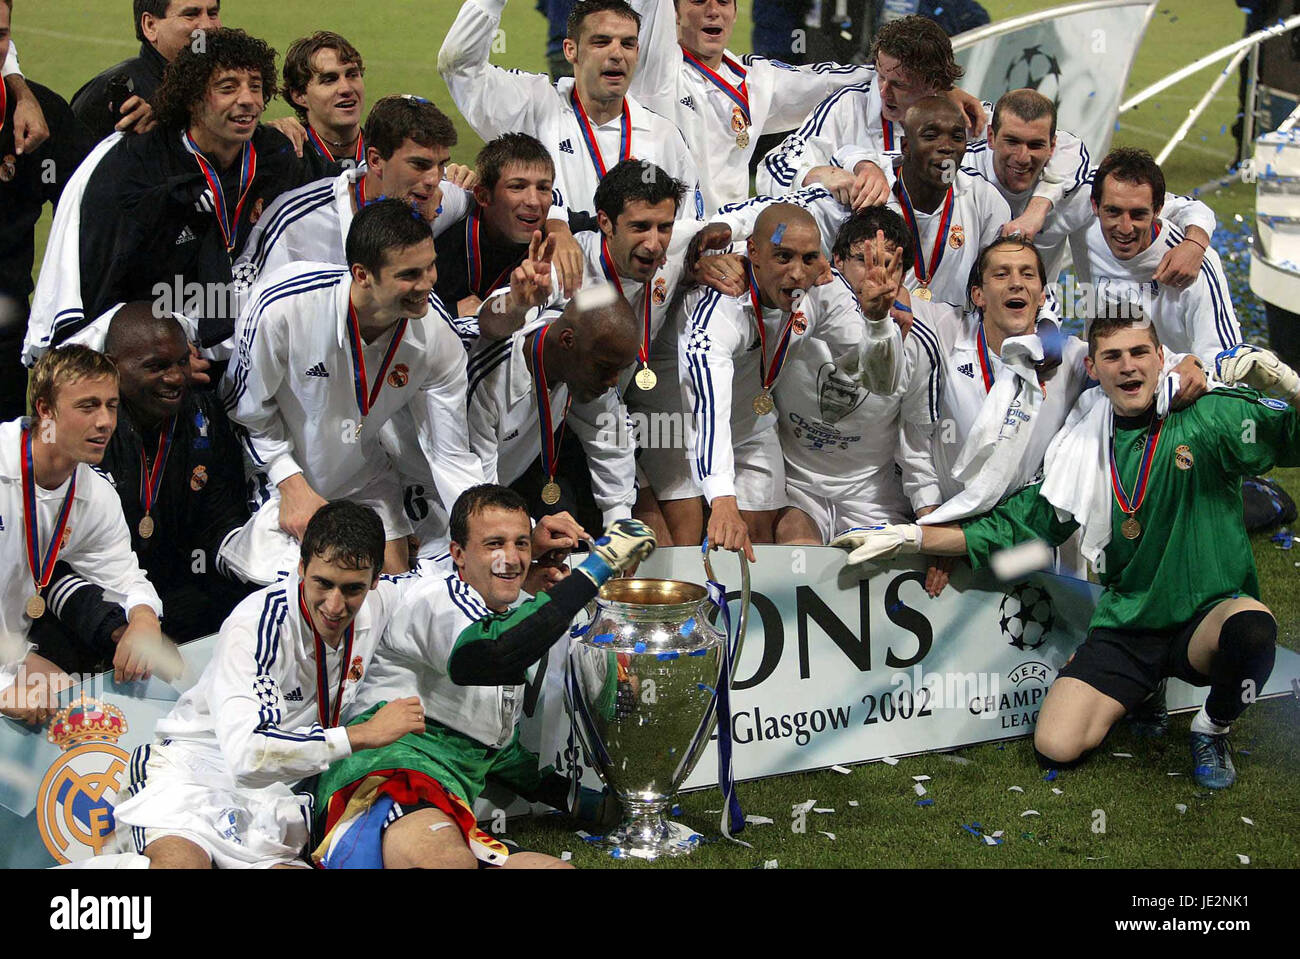 REAL MADRID WINNERS OF CHAMPIONS LEAGUE HAMPDEN PARK GLASGOW 15 May 2002  Stock Photo - Alamy